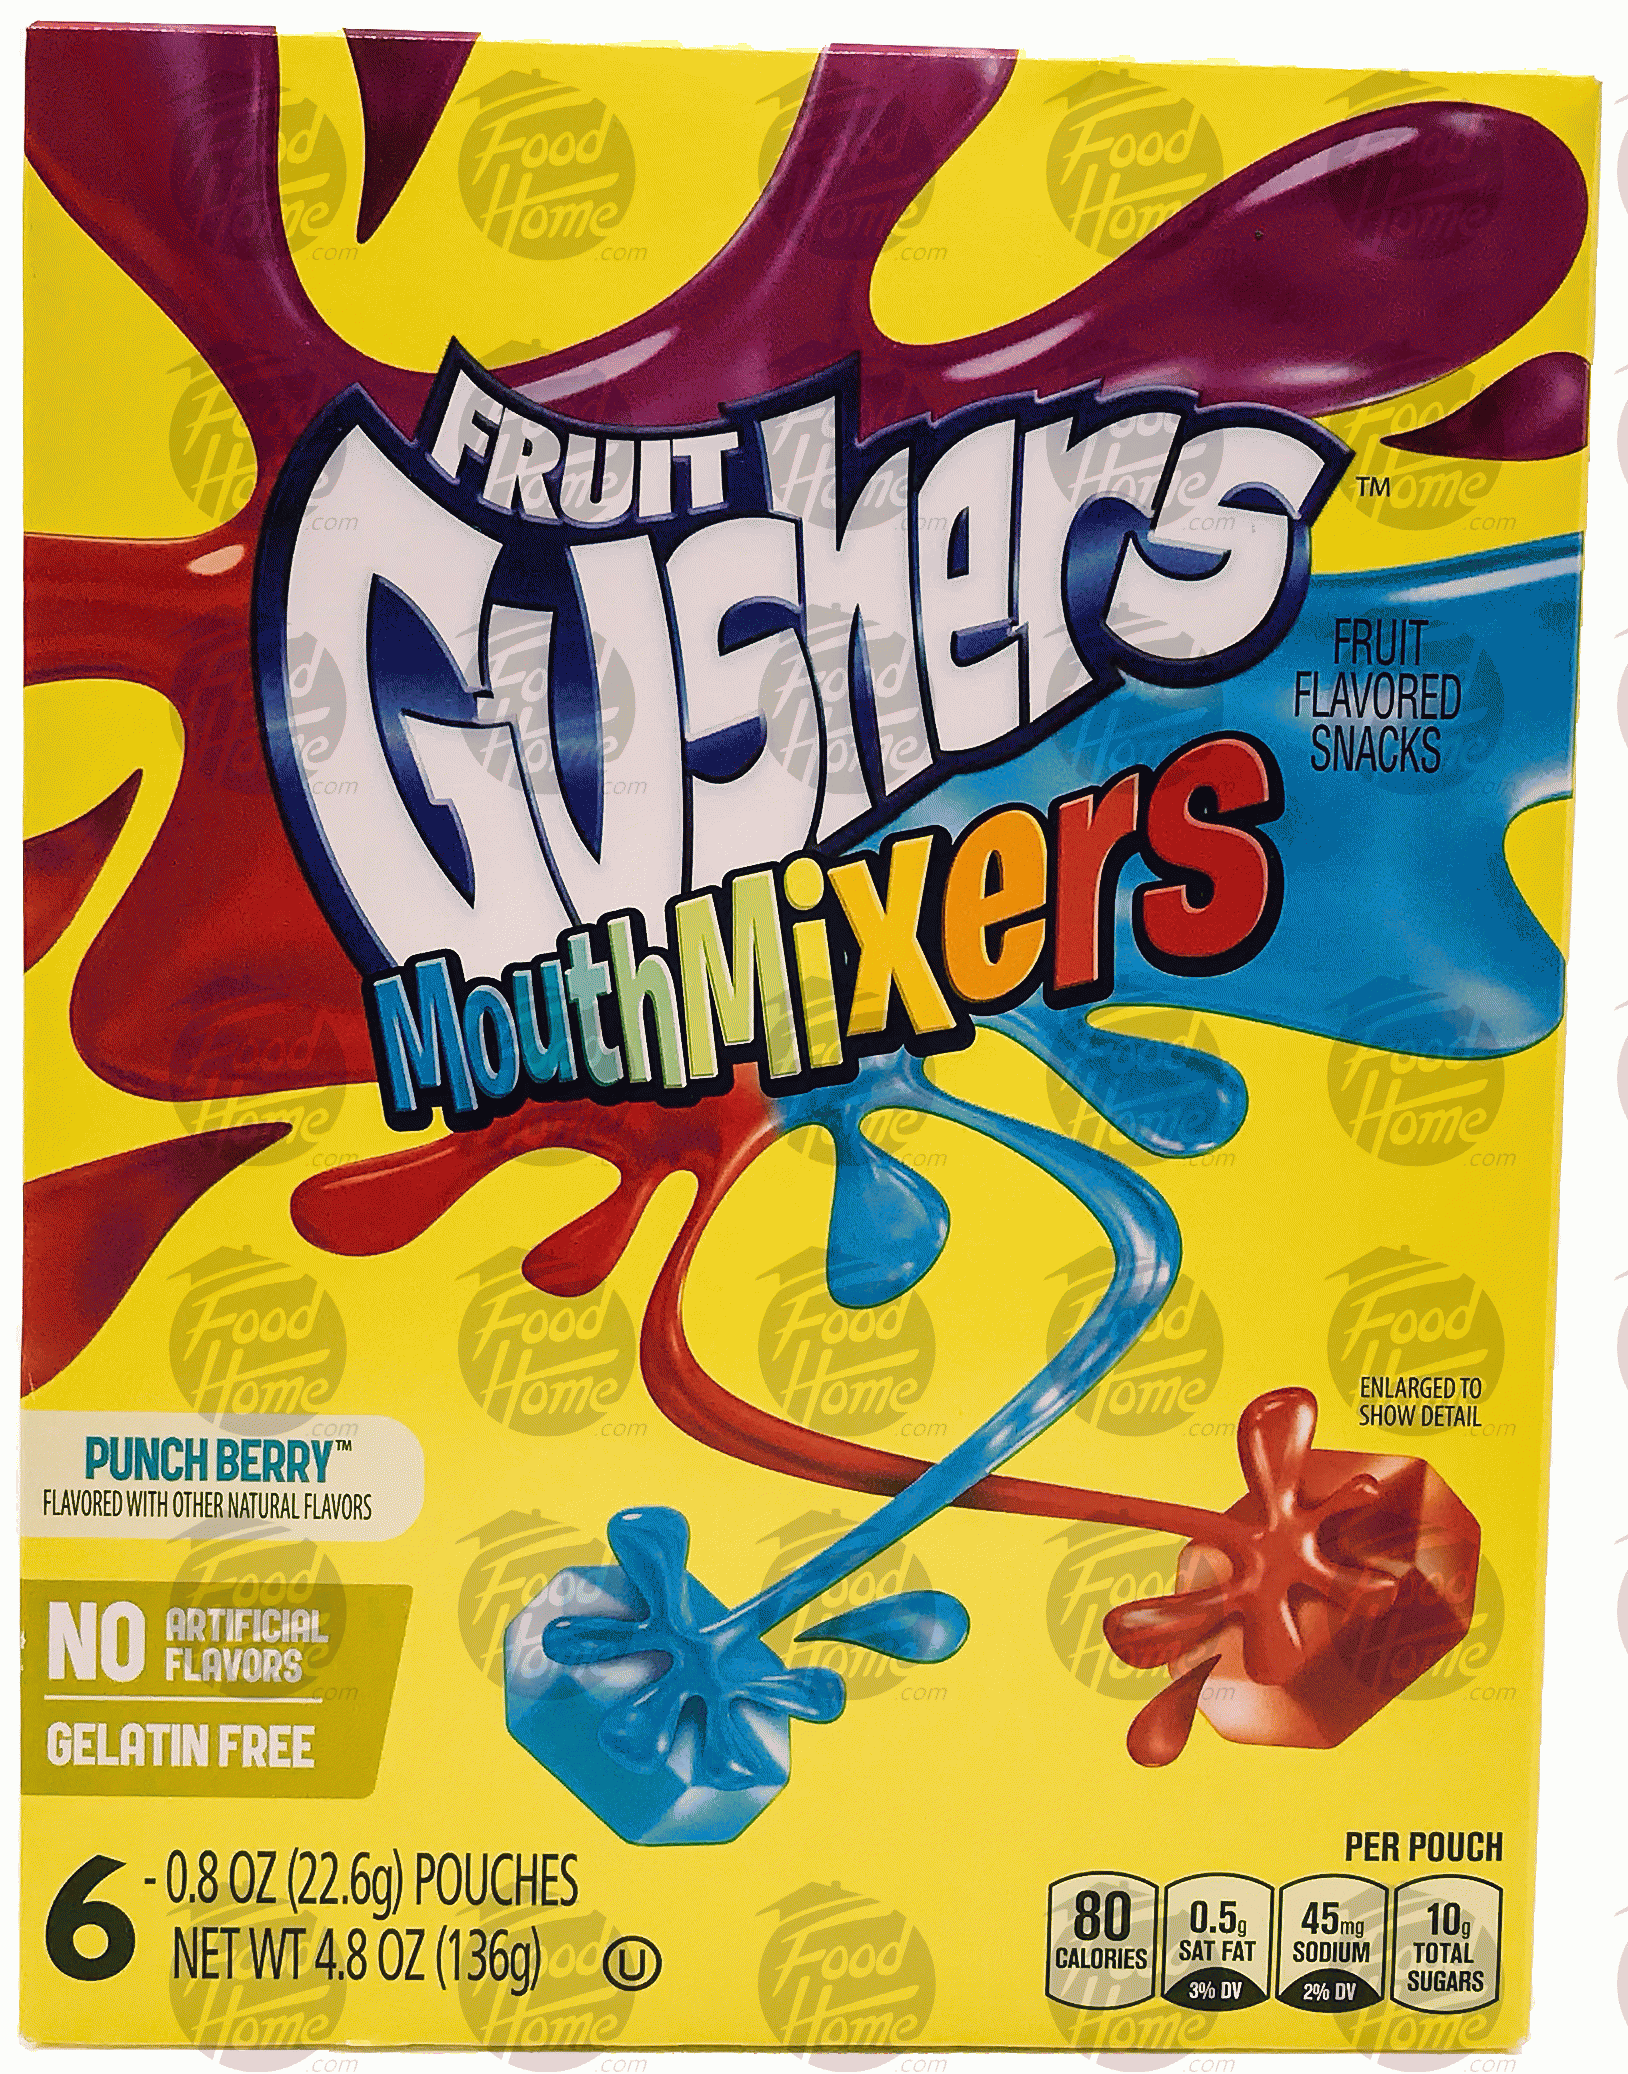 Fruit Gushers MouthMixers punch berry flavored fruit gusher snacks, 6 pk., box Full-Size Picture